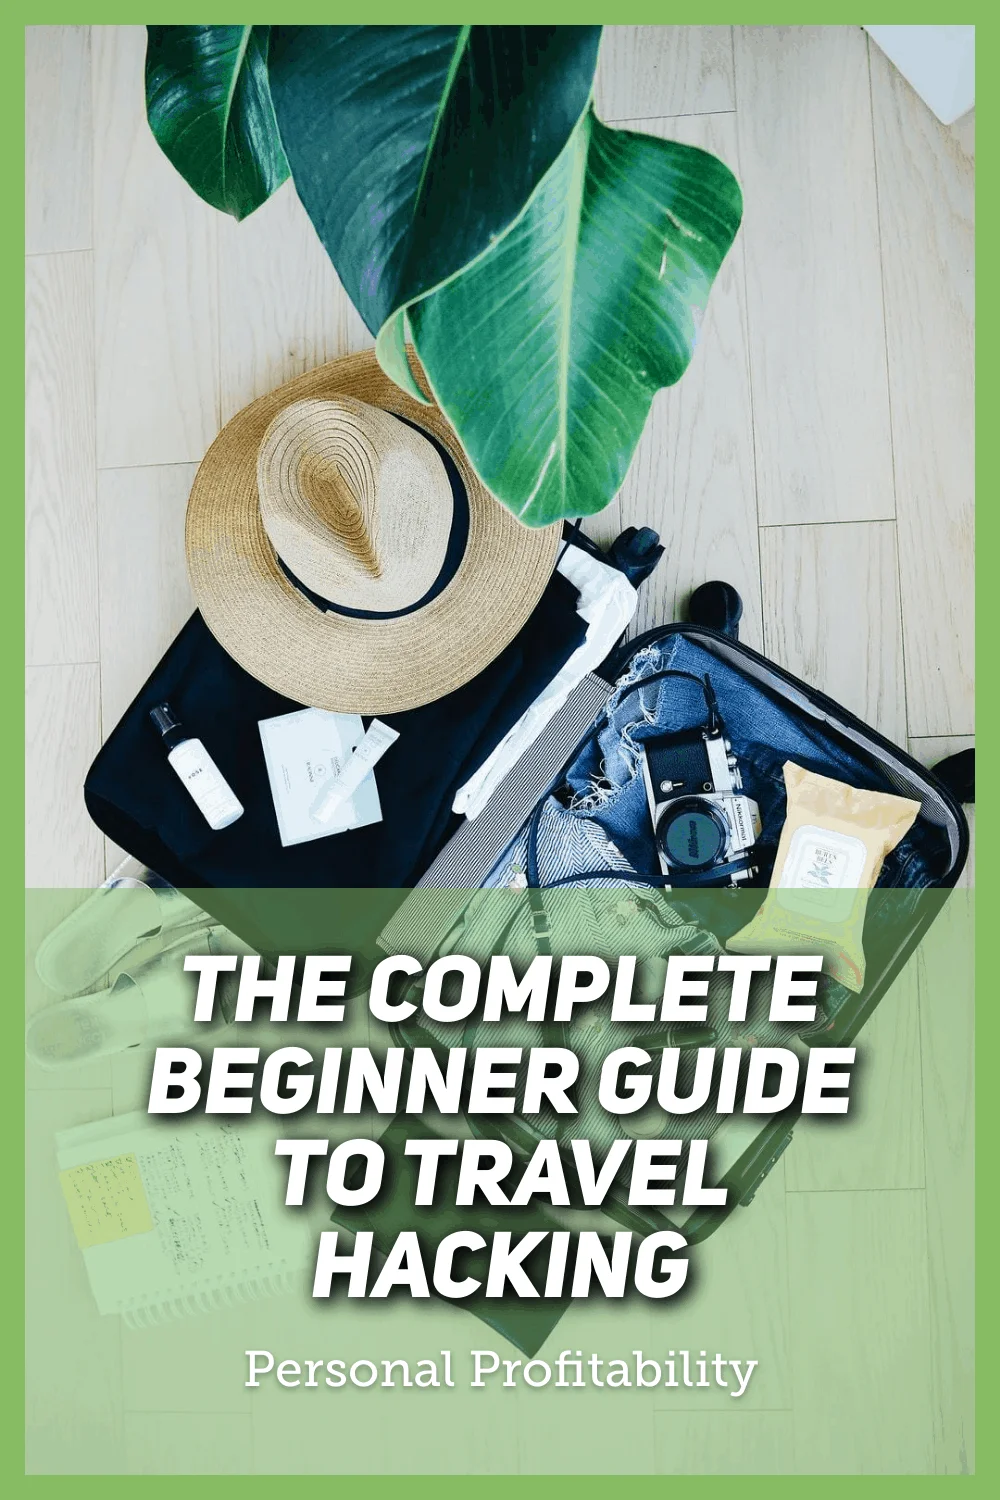 The Complete Beginner Guide to Travel Hacking